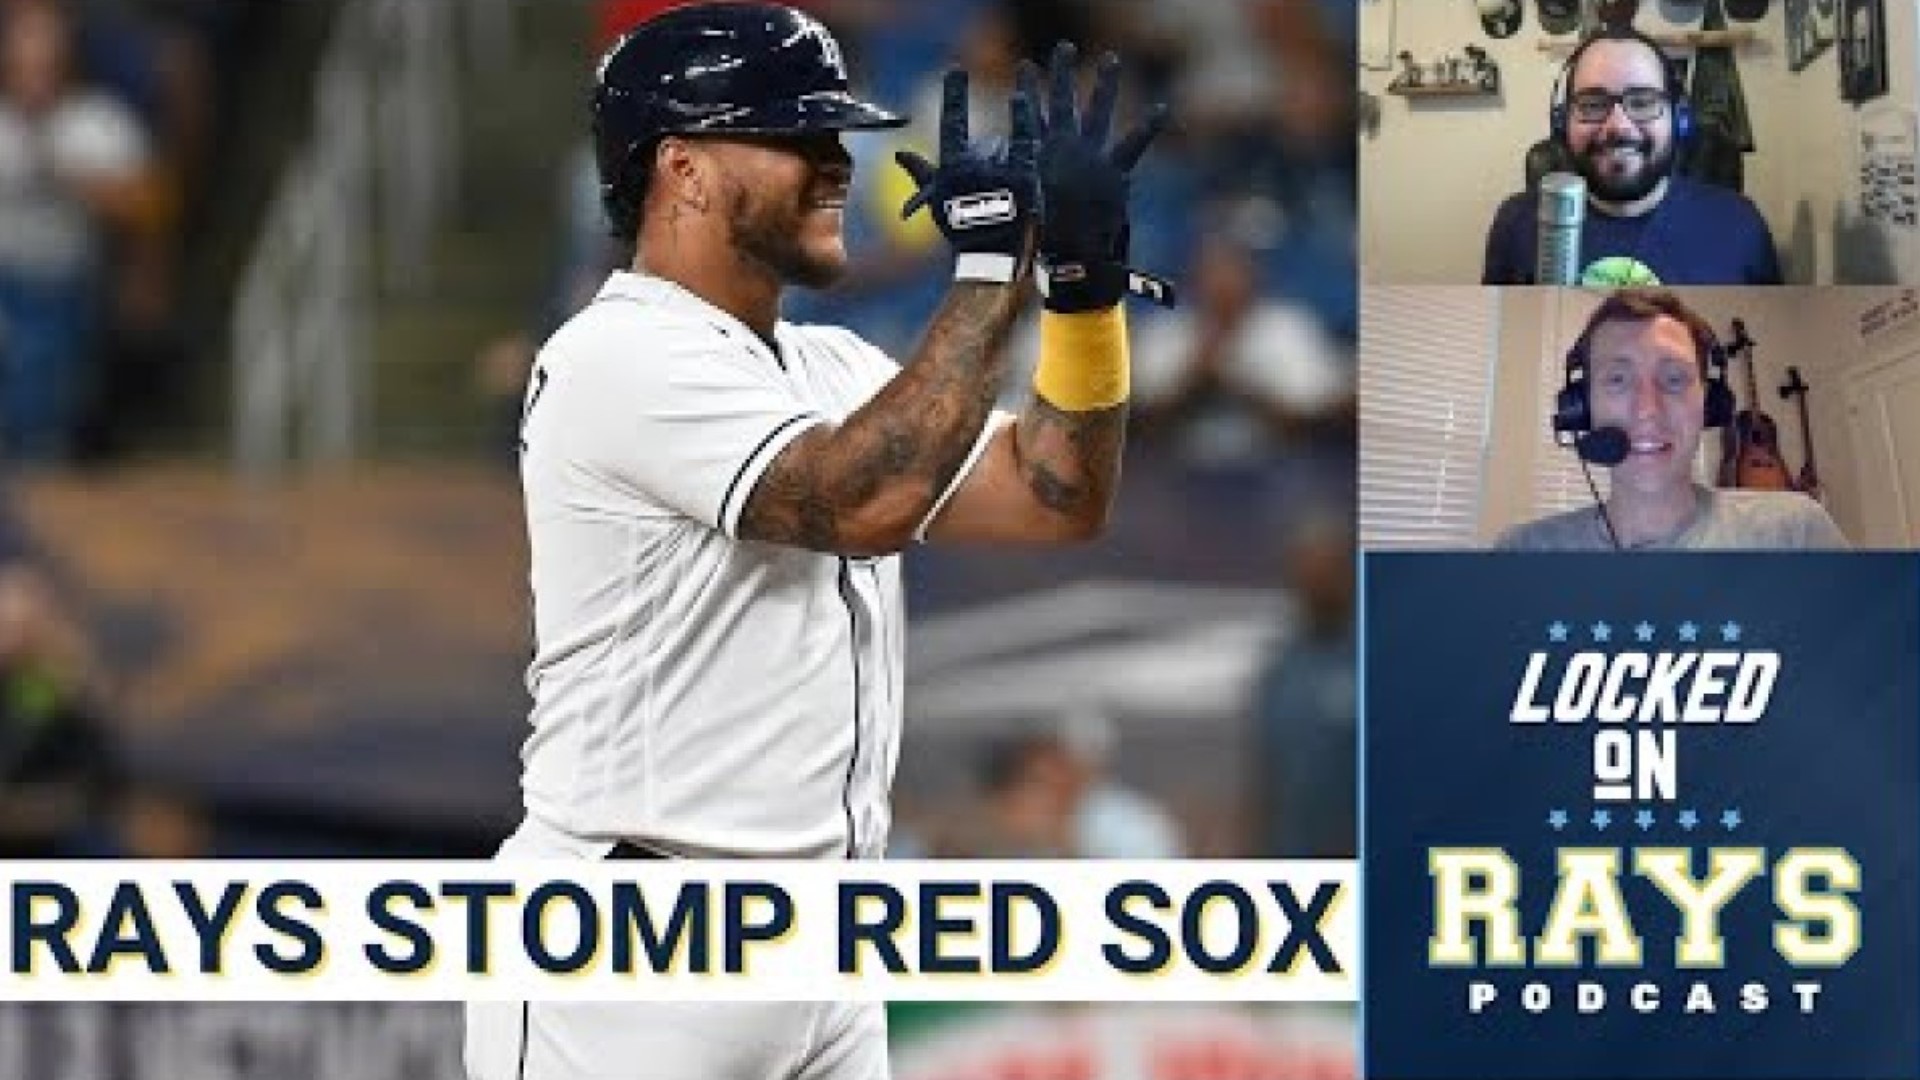 The Tampa Bay Rays got back on the winning side of the ledger by taking game 1 against the Red Sox by a score of 10-5.